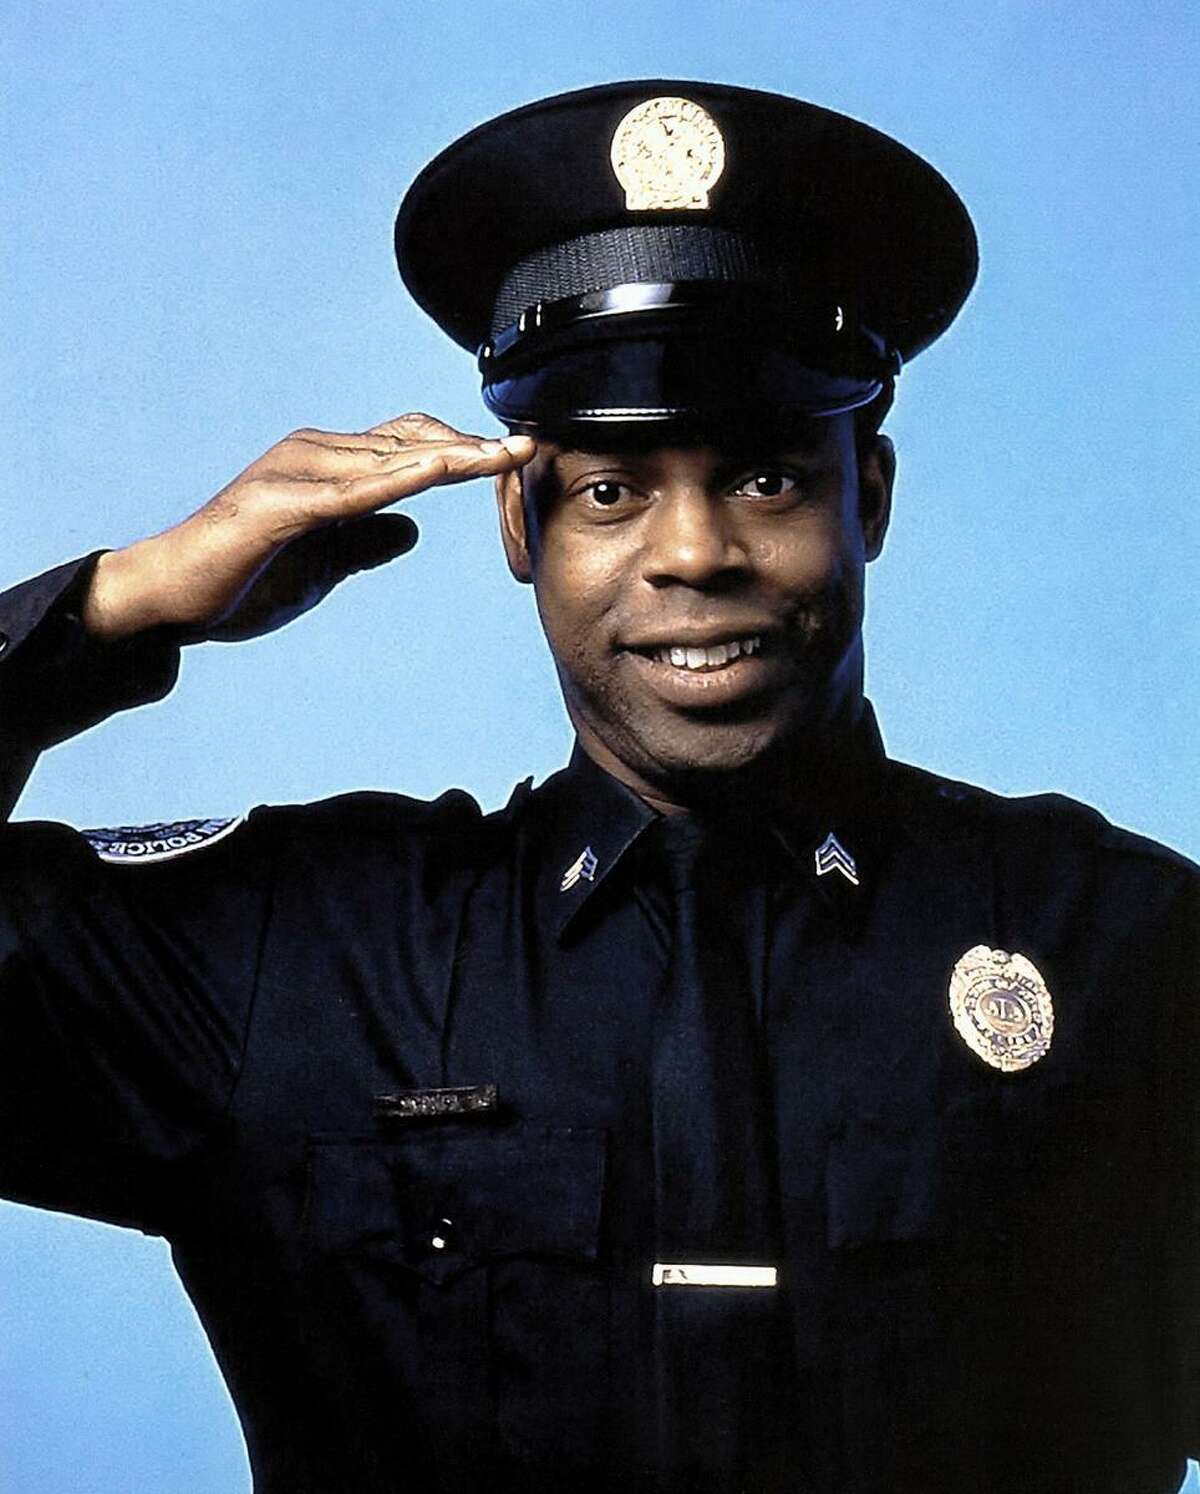 "Police Academy" sound effects guy Michael Winslow is among the comedians playing the Houston Whatever Fest east of downtown April 1-2. Also on the bill: Ali Saddiq, Sam Morril, Dave Ross, Jo Firestone and Hari Kondaboln.